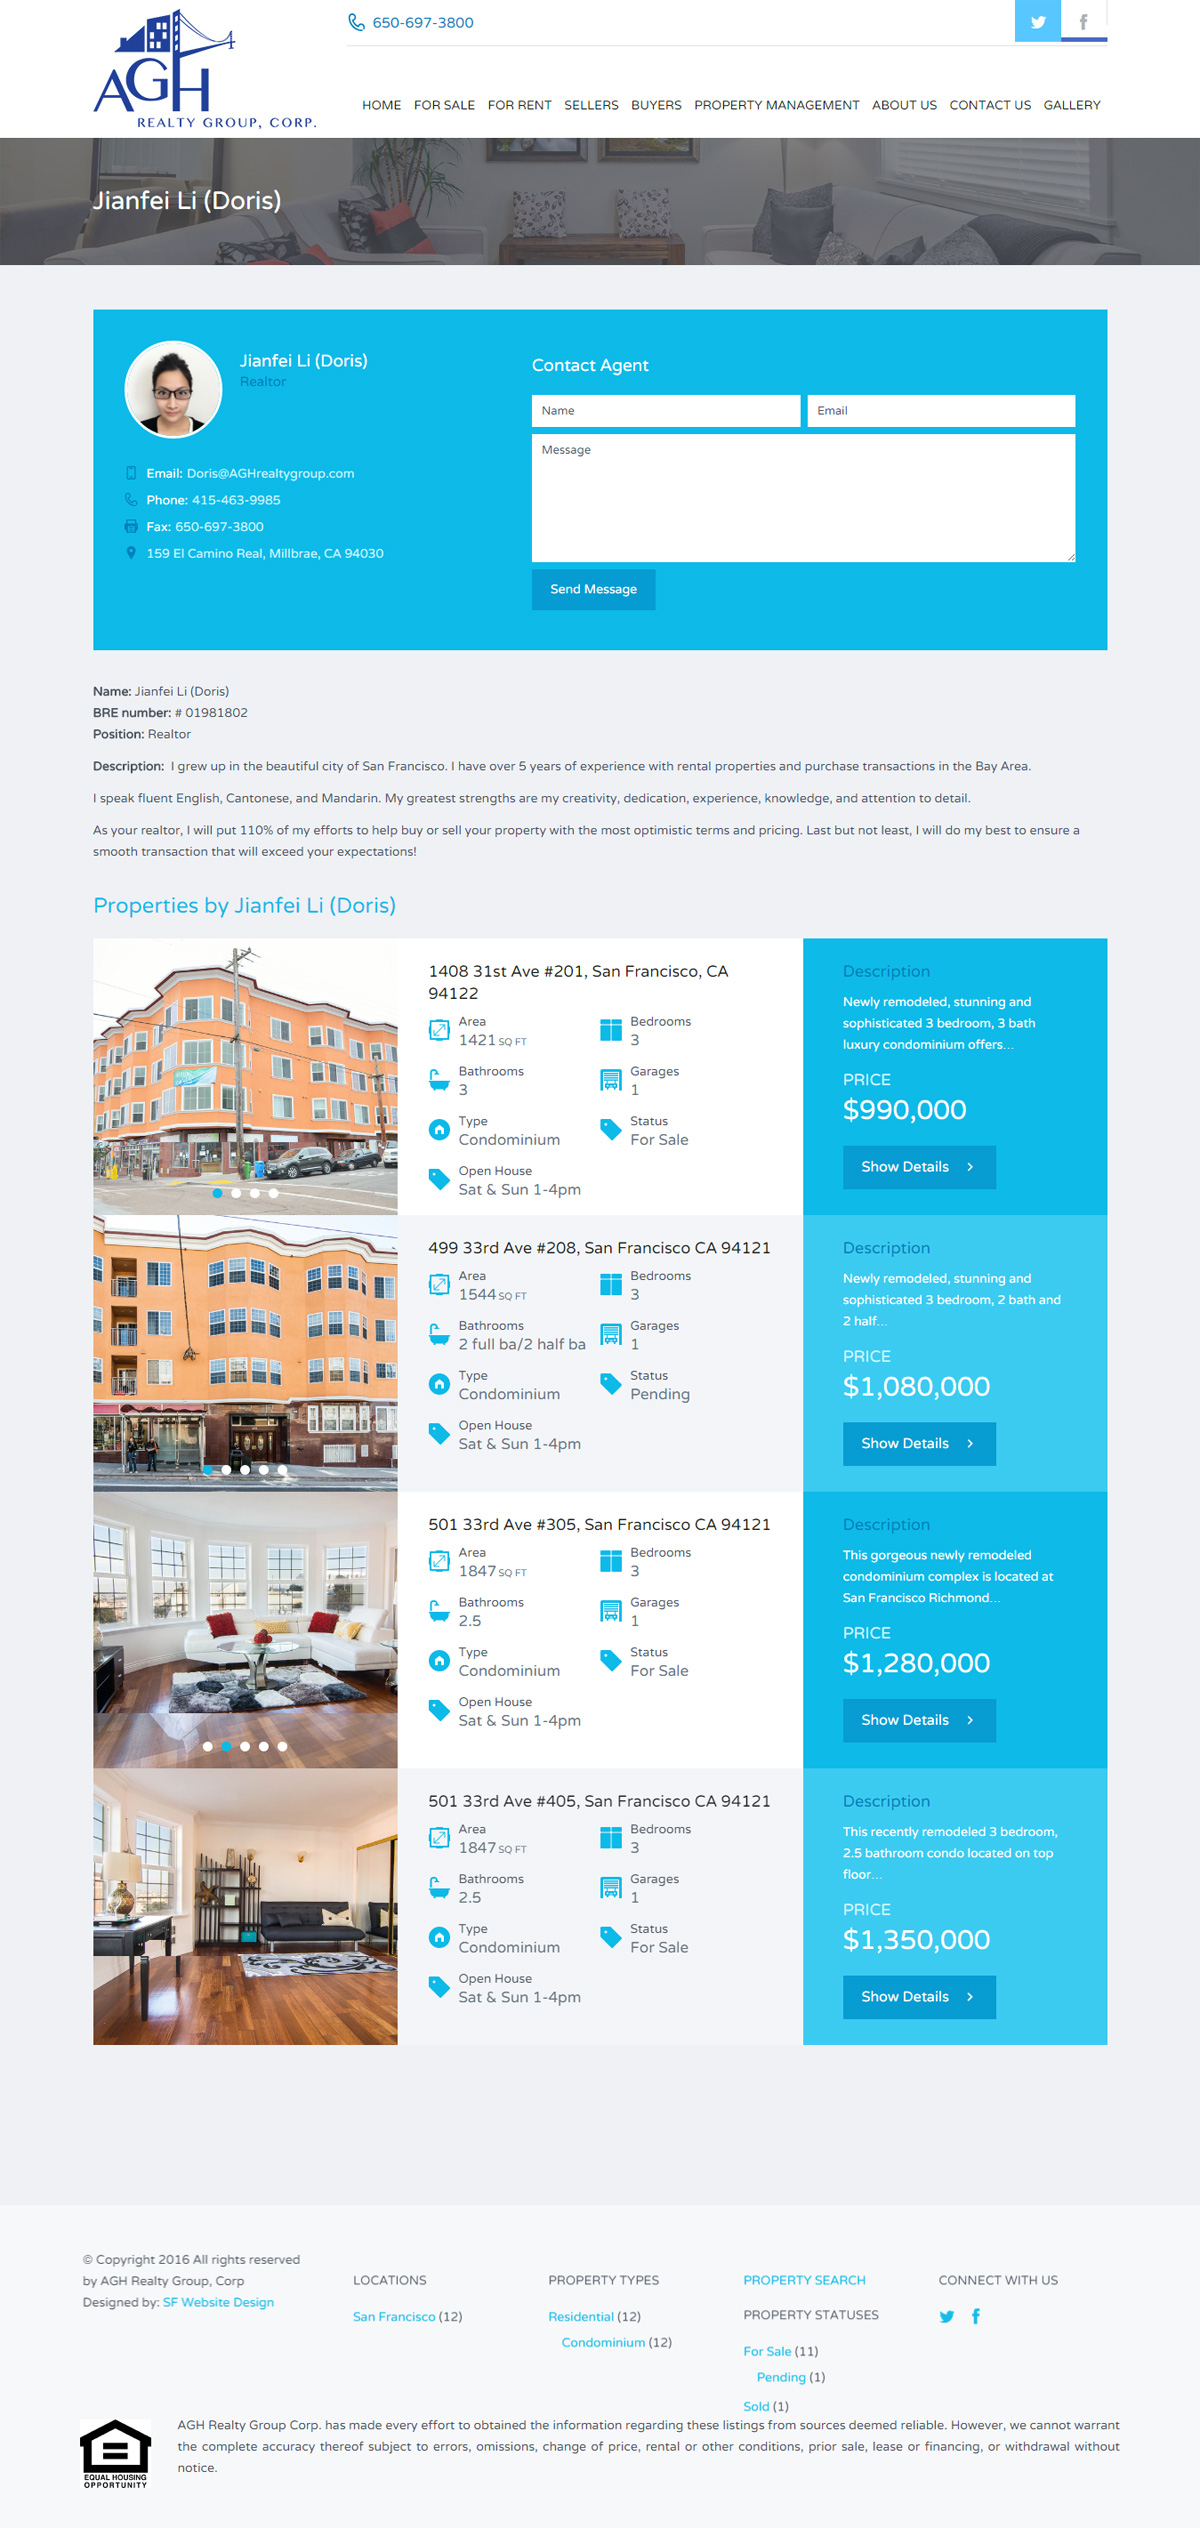 AGH-Realty-Group-real-estate-website-design-in-San-Francisco